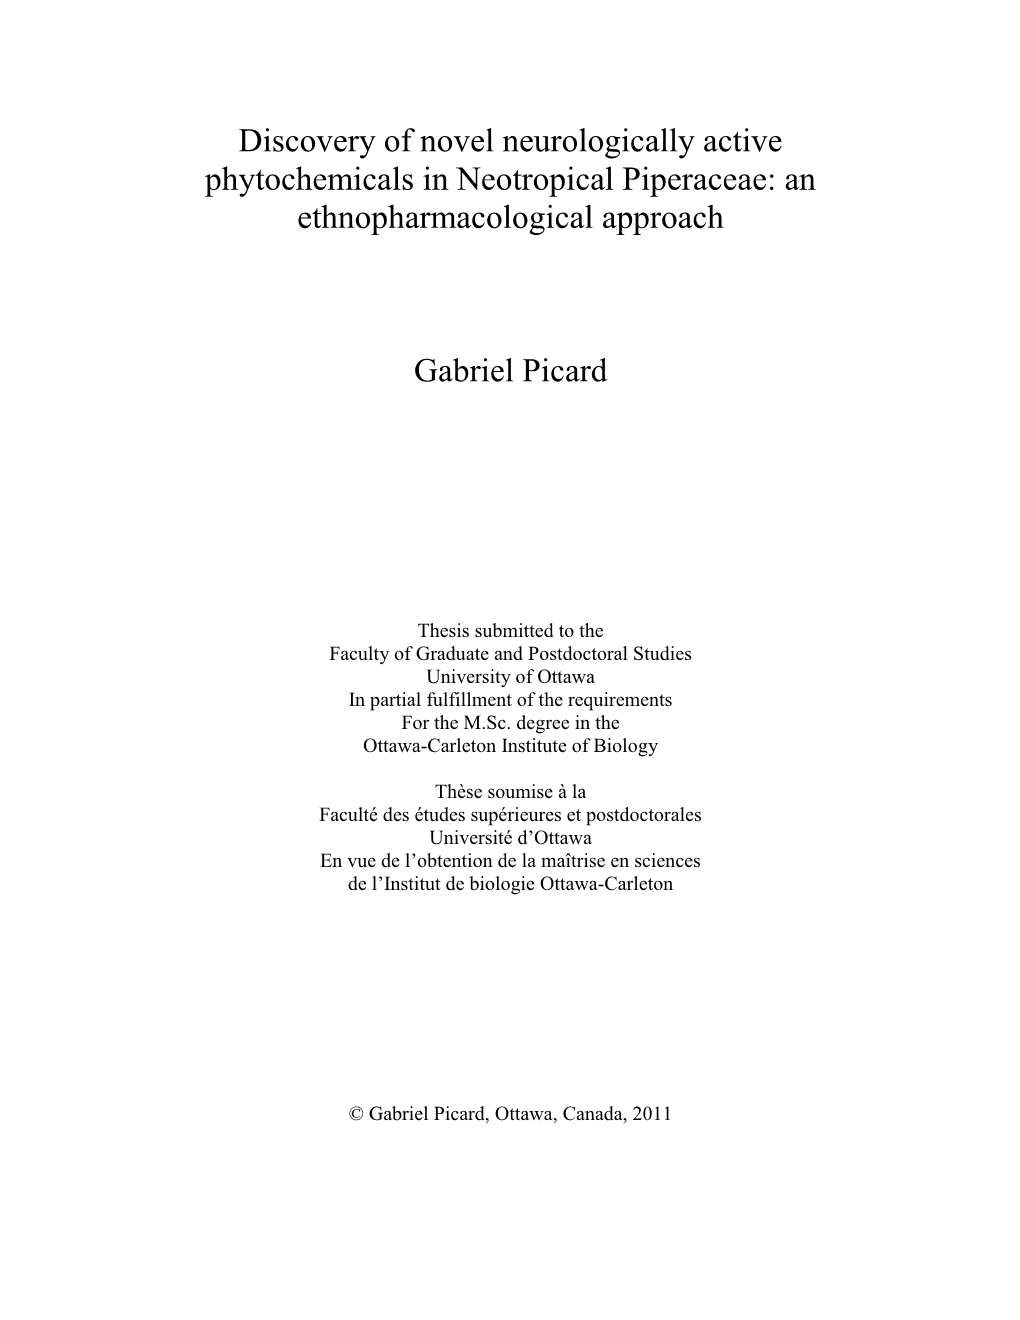 An Ethnopharmacological Approach Gabriel Pica